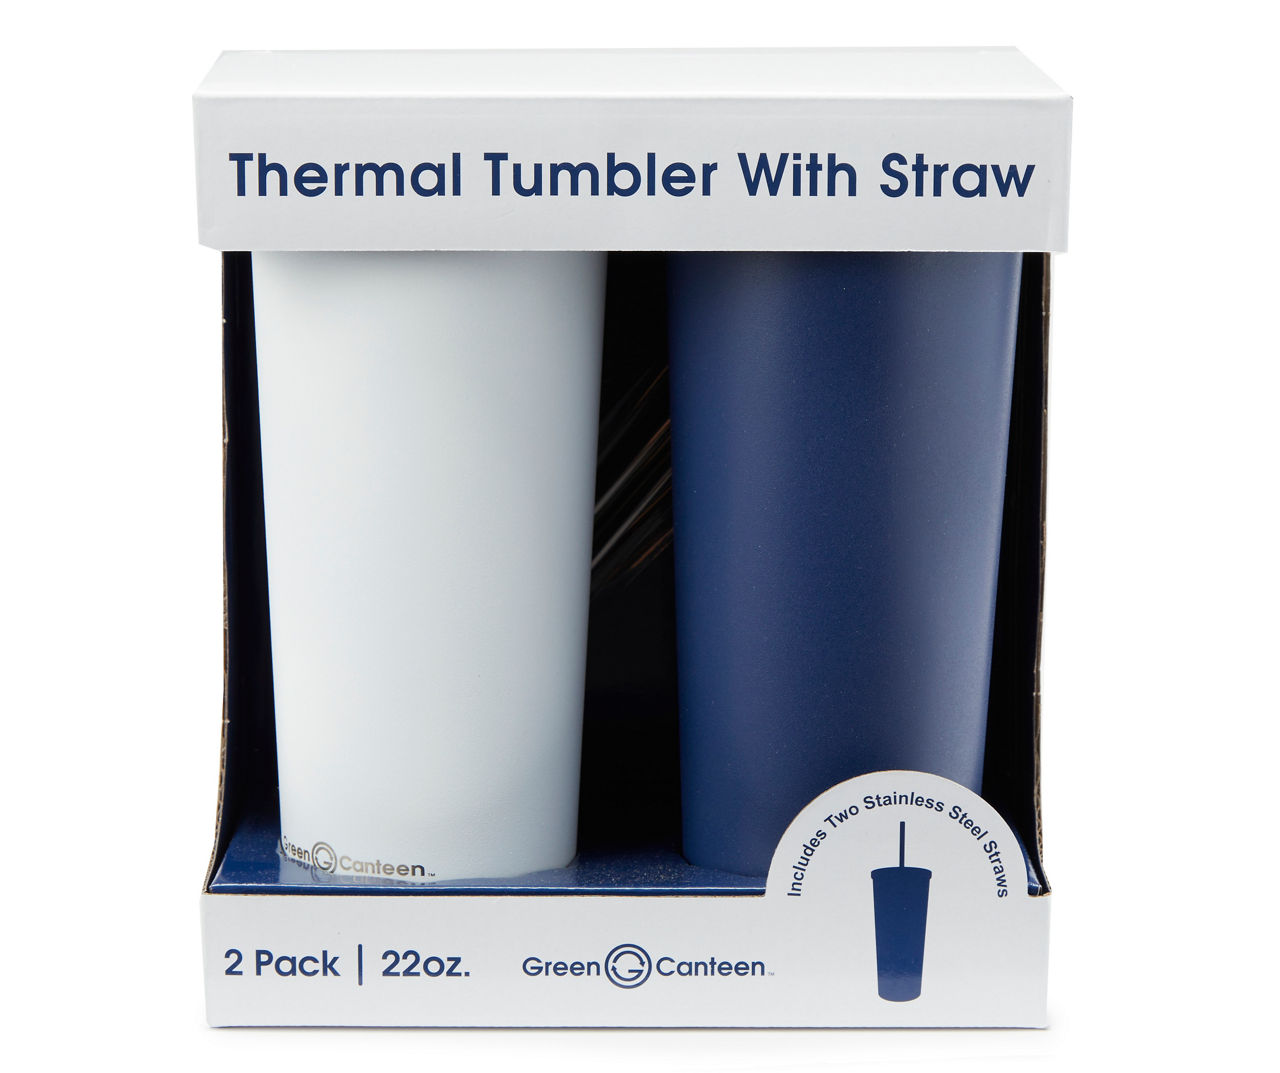 Green Canteen - White & Navy Double Wall Stainless Steel Straw Tumbler, 2-Pack